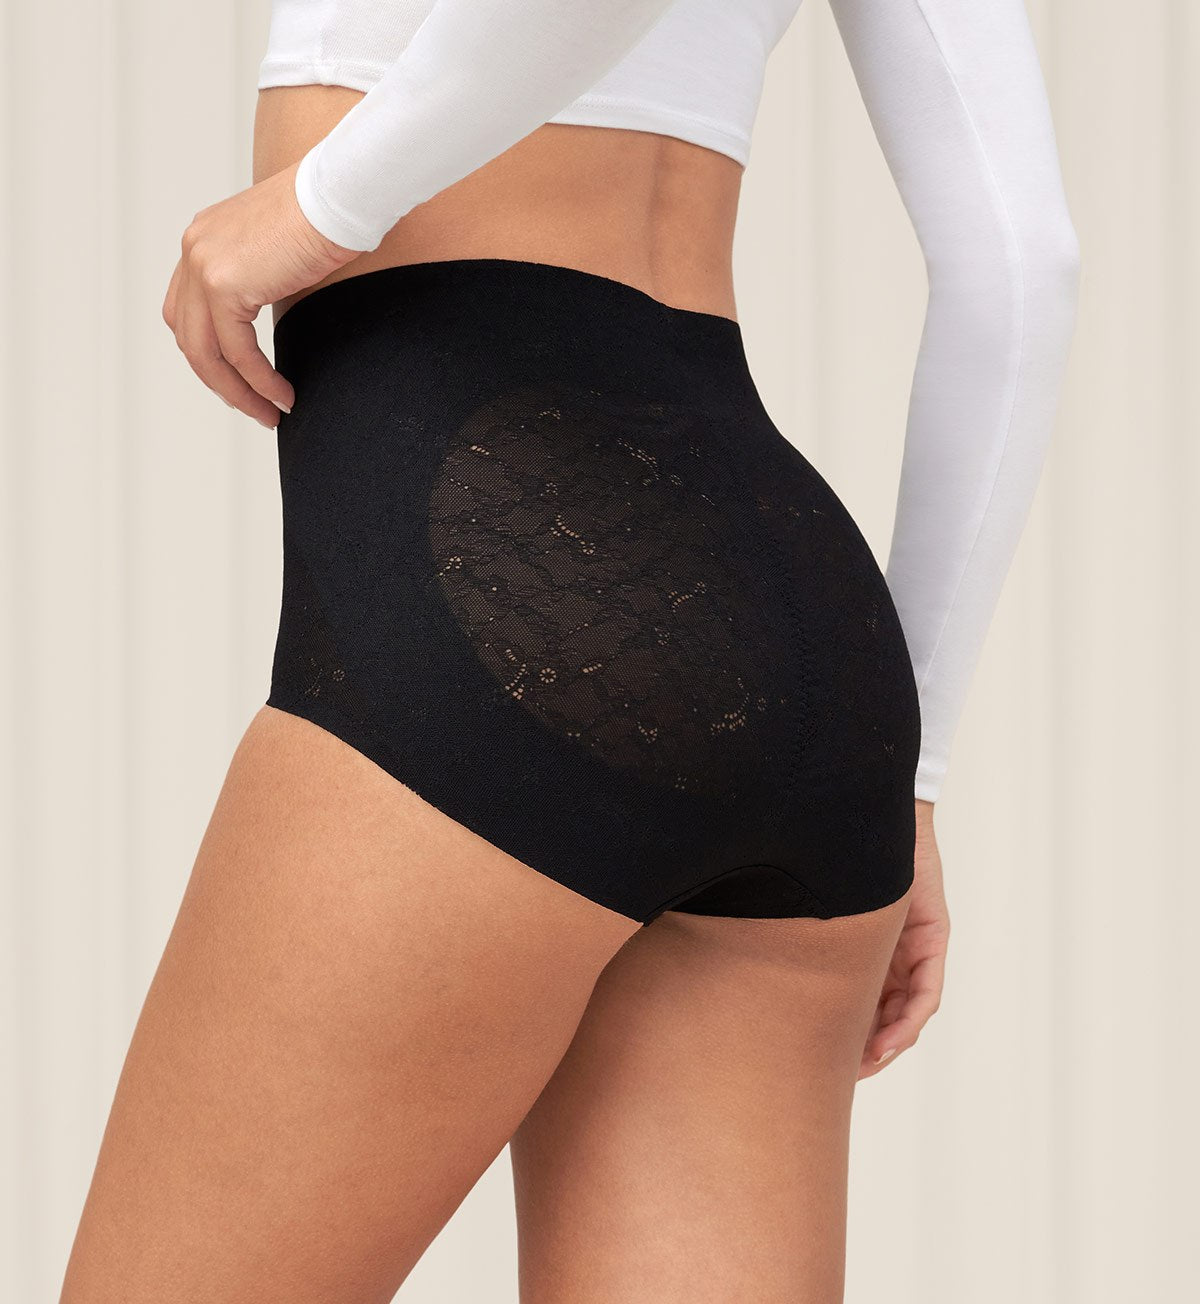 Smoothing Lace Body Shaping Brief